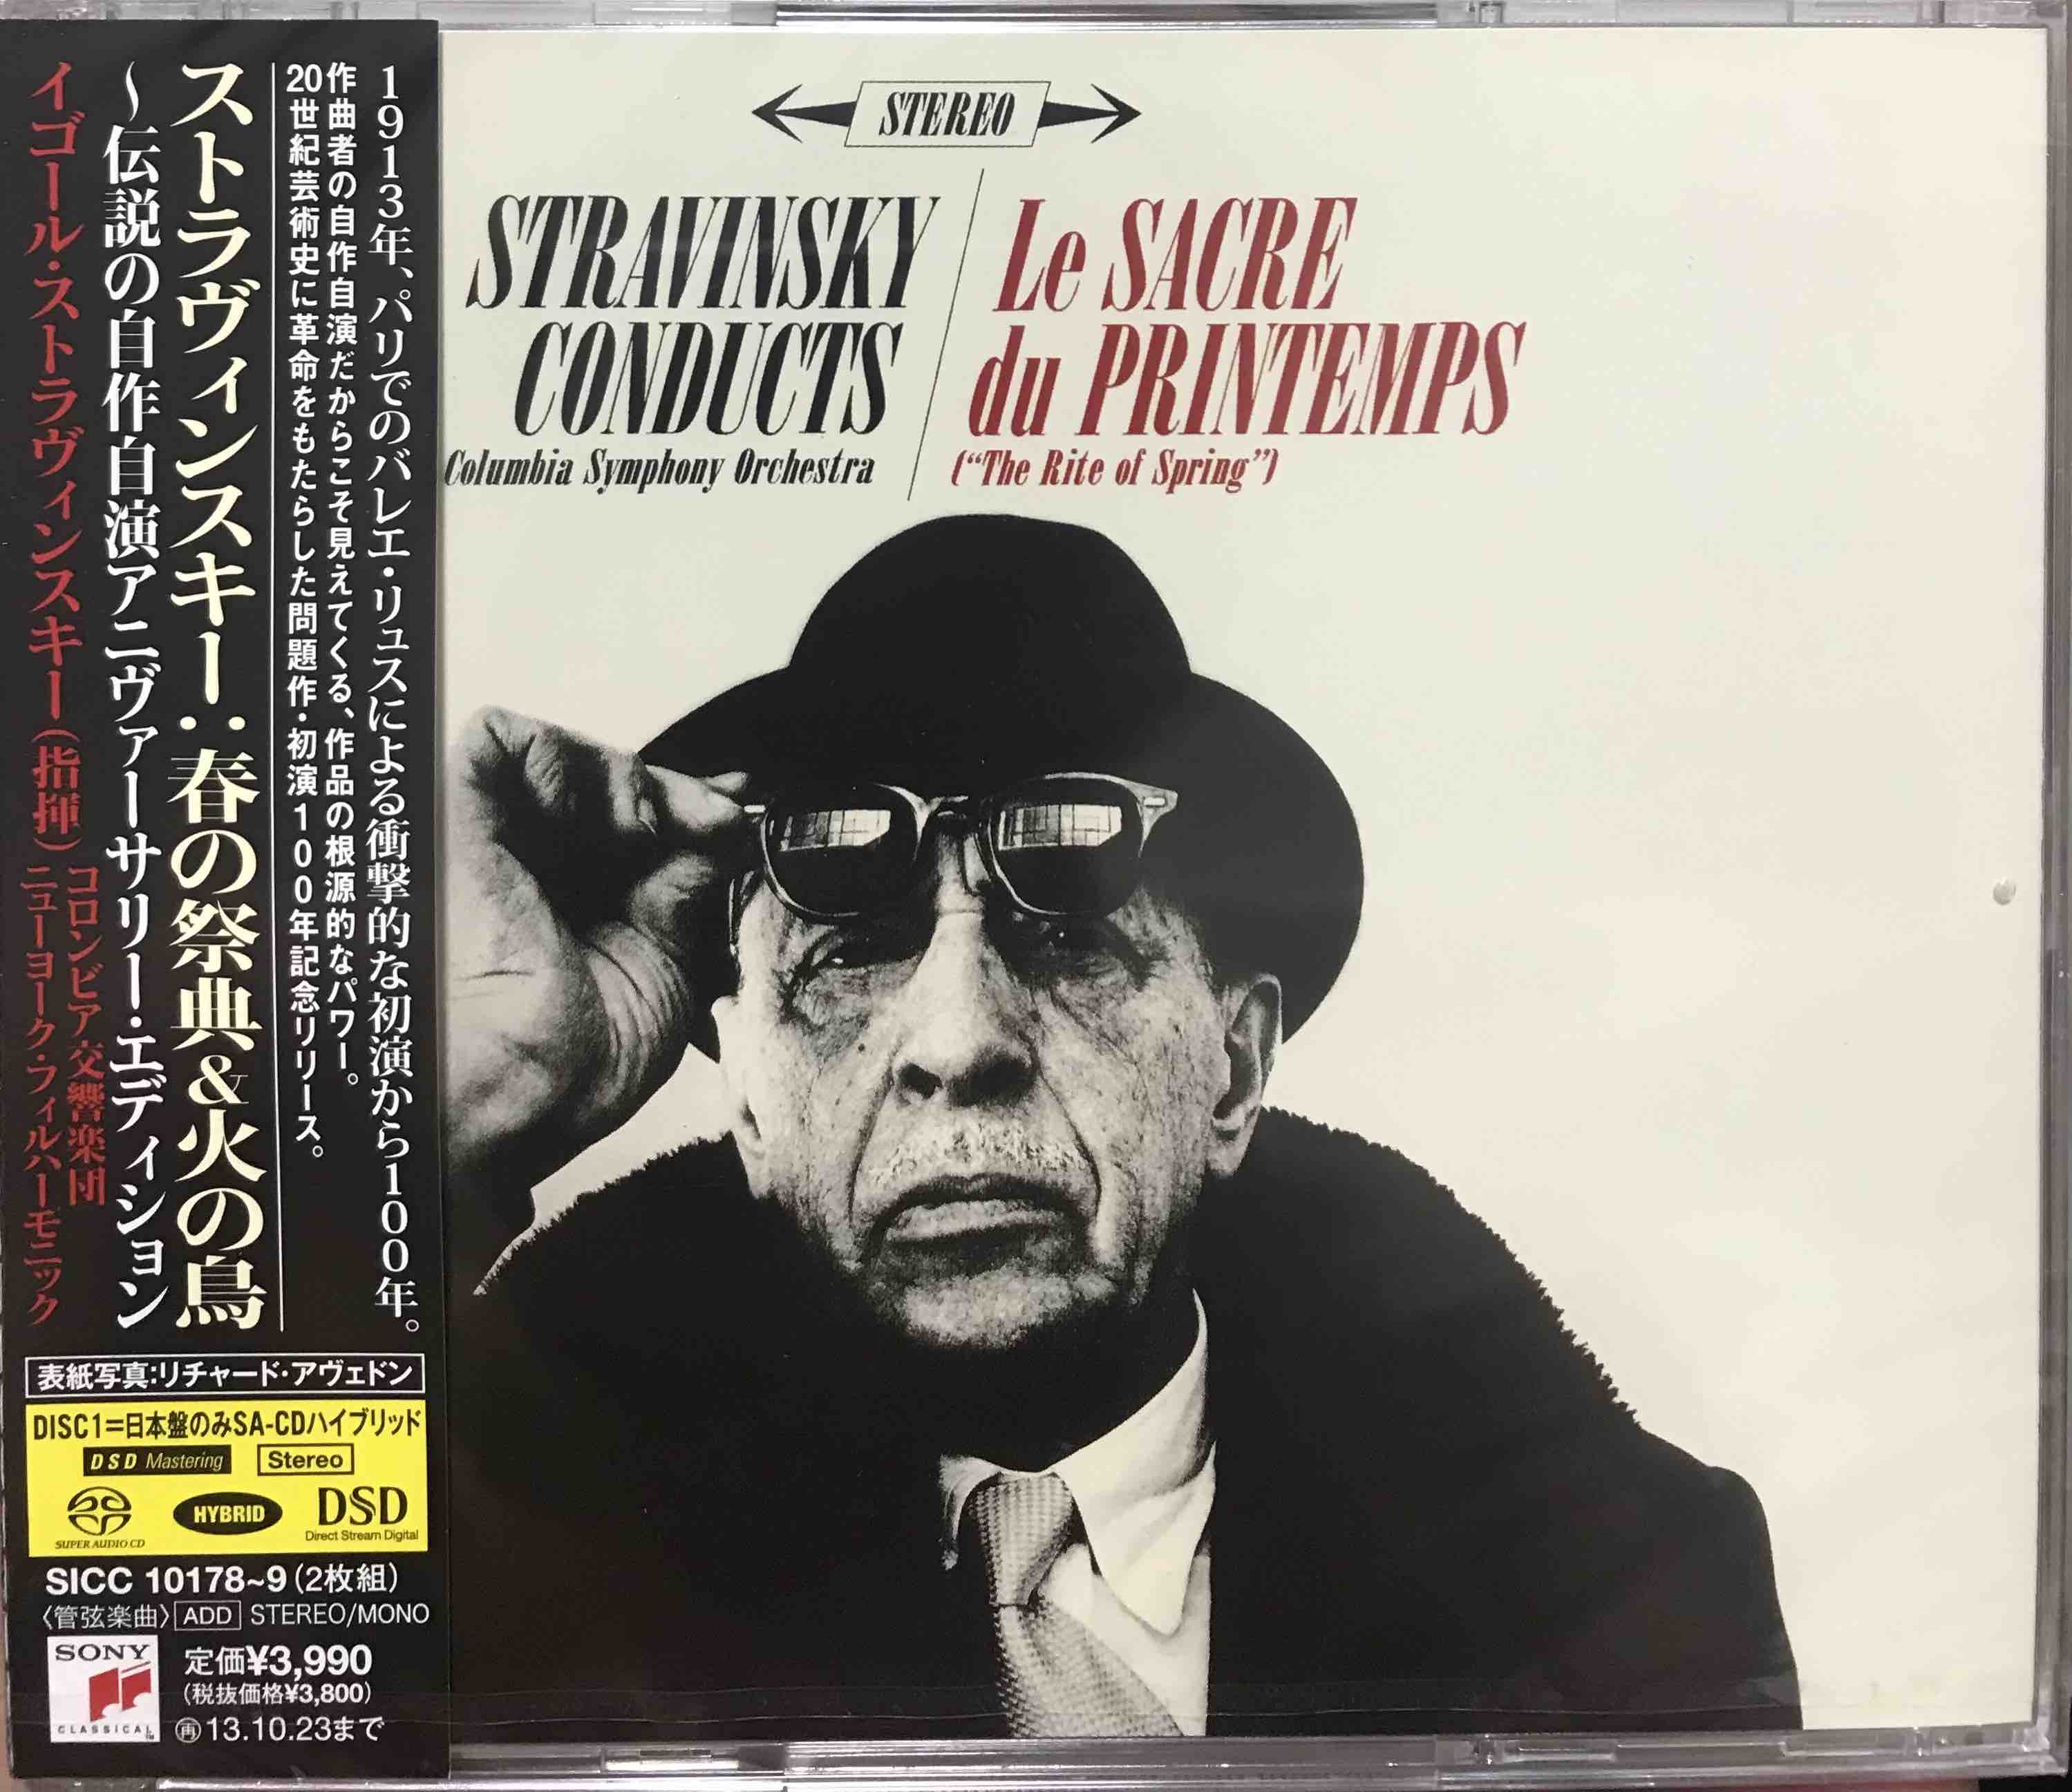 Igor Stravinsky, Columbia Symphony Orchestra, The New York Philharmonic Orchestra ‎– Stravinsky Conducts Le Sacre Du Printemps (The Rite Of Spring)